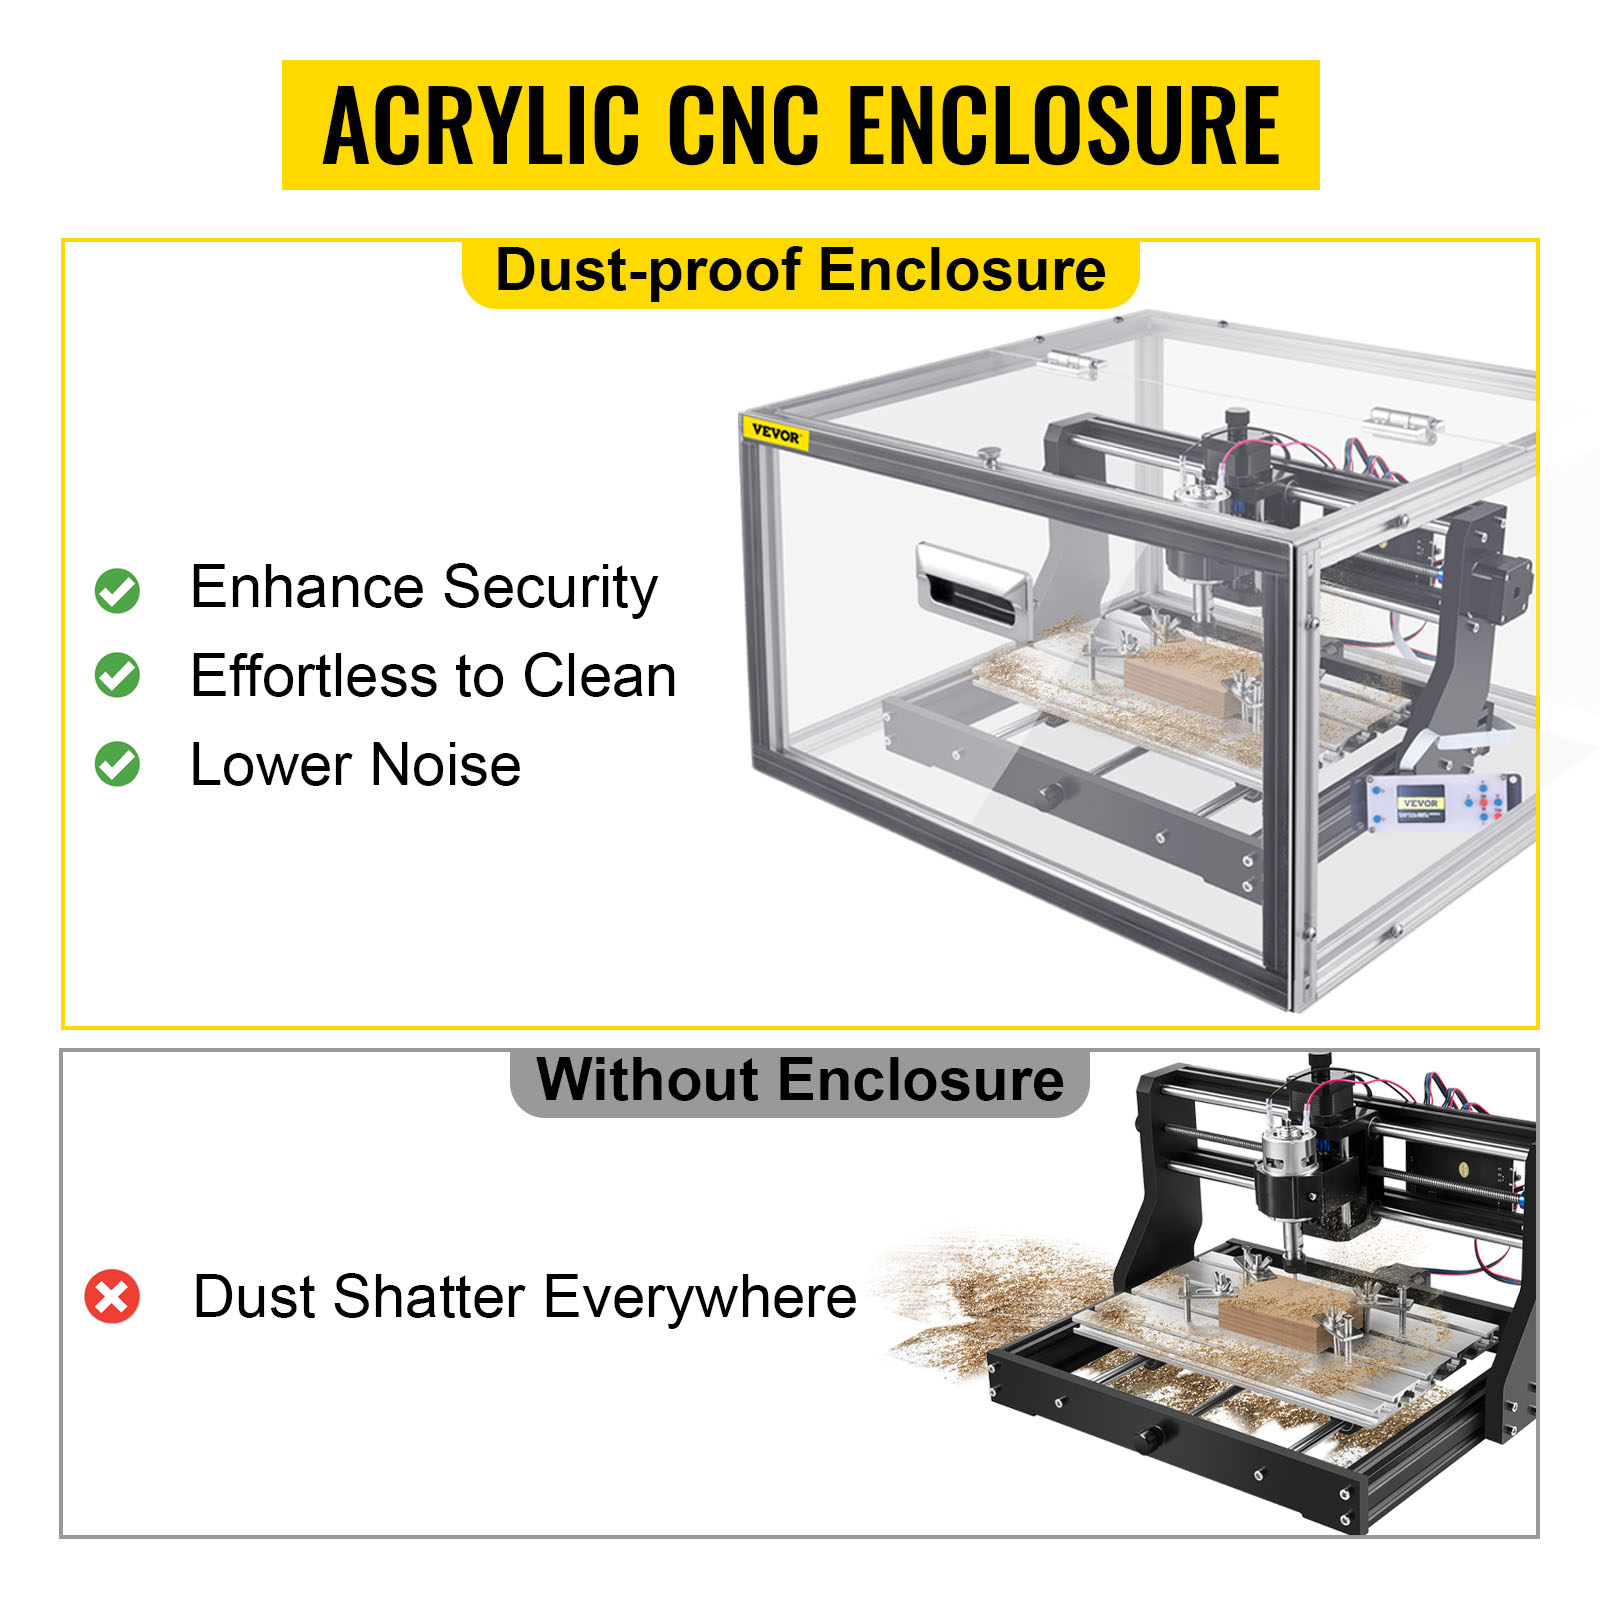 2 in 1 5500mW Engraver CNC 3018 Pro Engraving Machine, GRBLControl PCB PVC  Wood Router CNC 3 Axis Milling Machine with Offline Controller and ER11 and